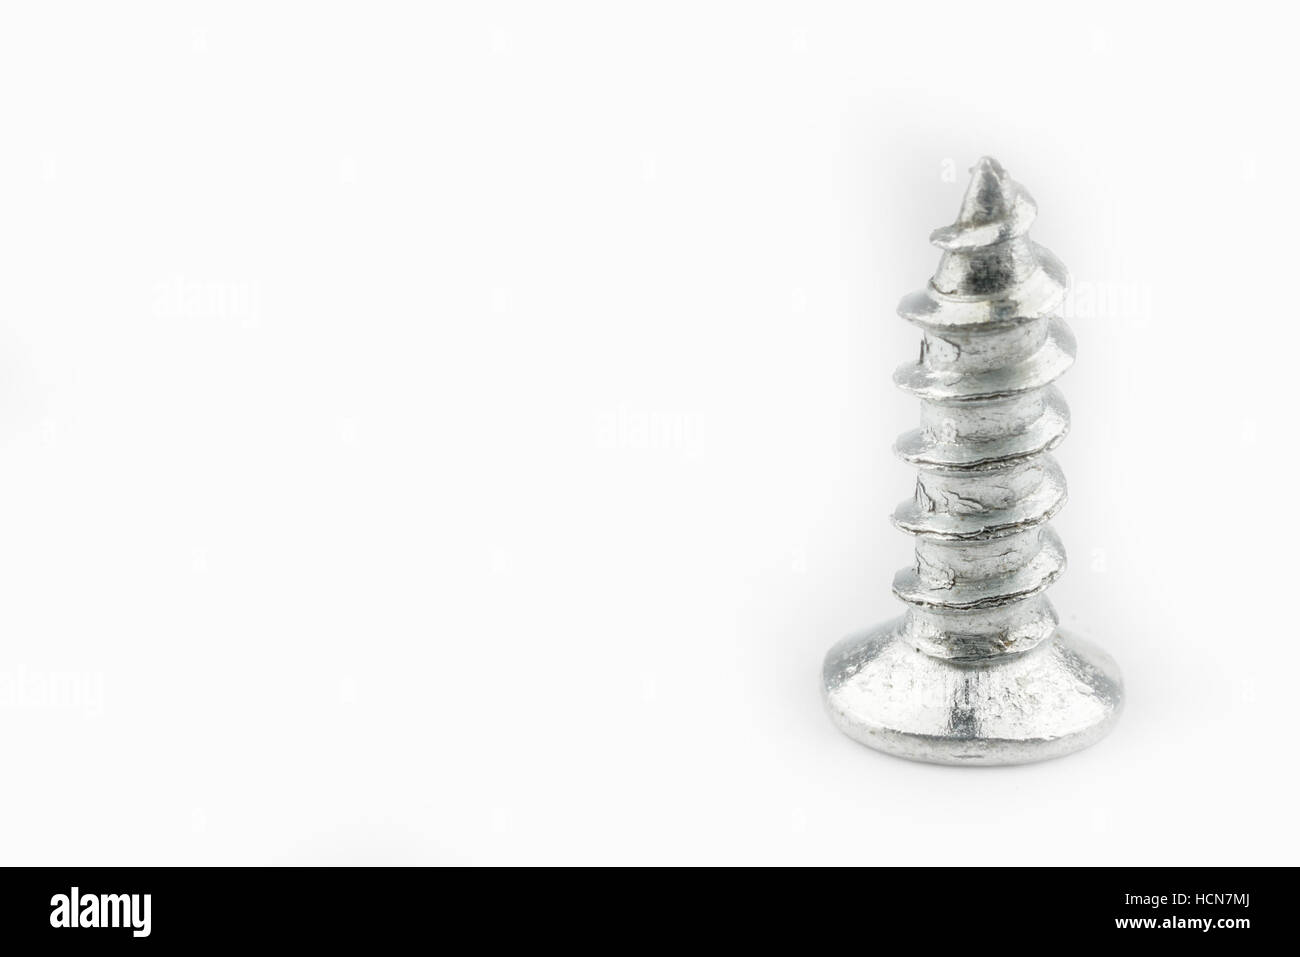 Screw with close up view. Stock Photo